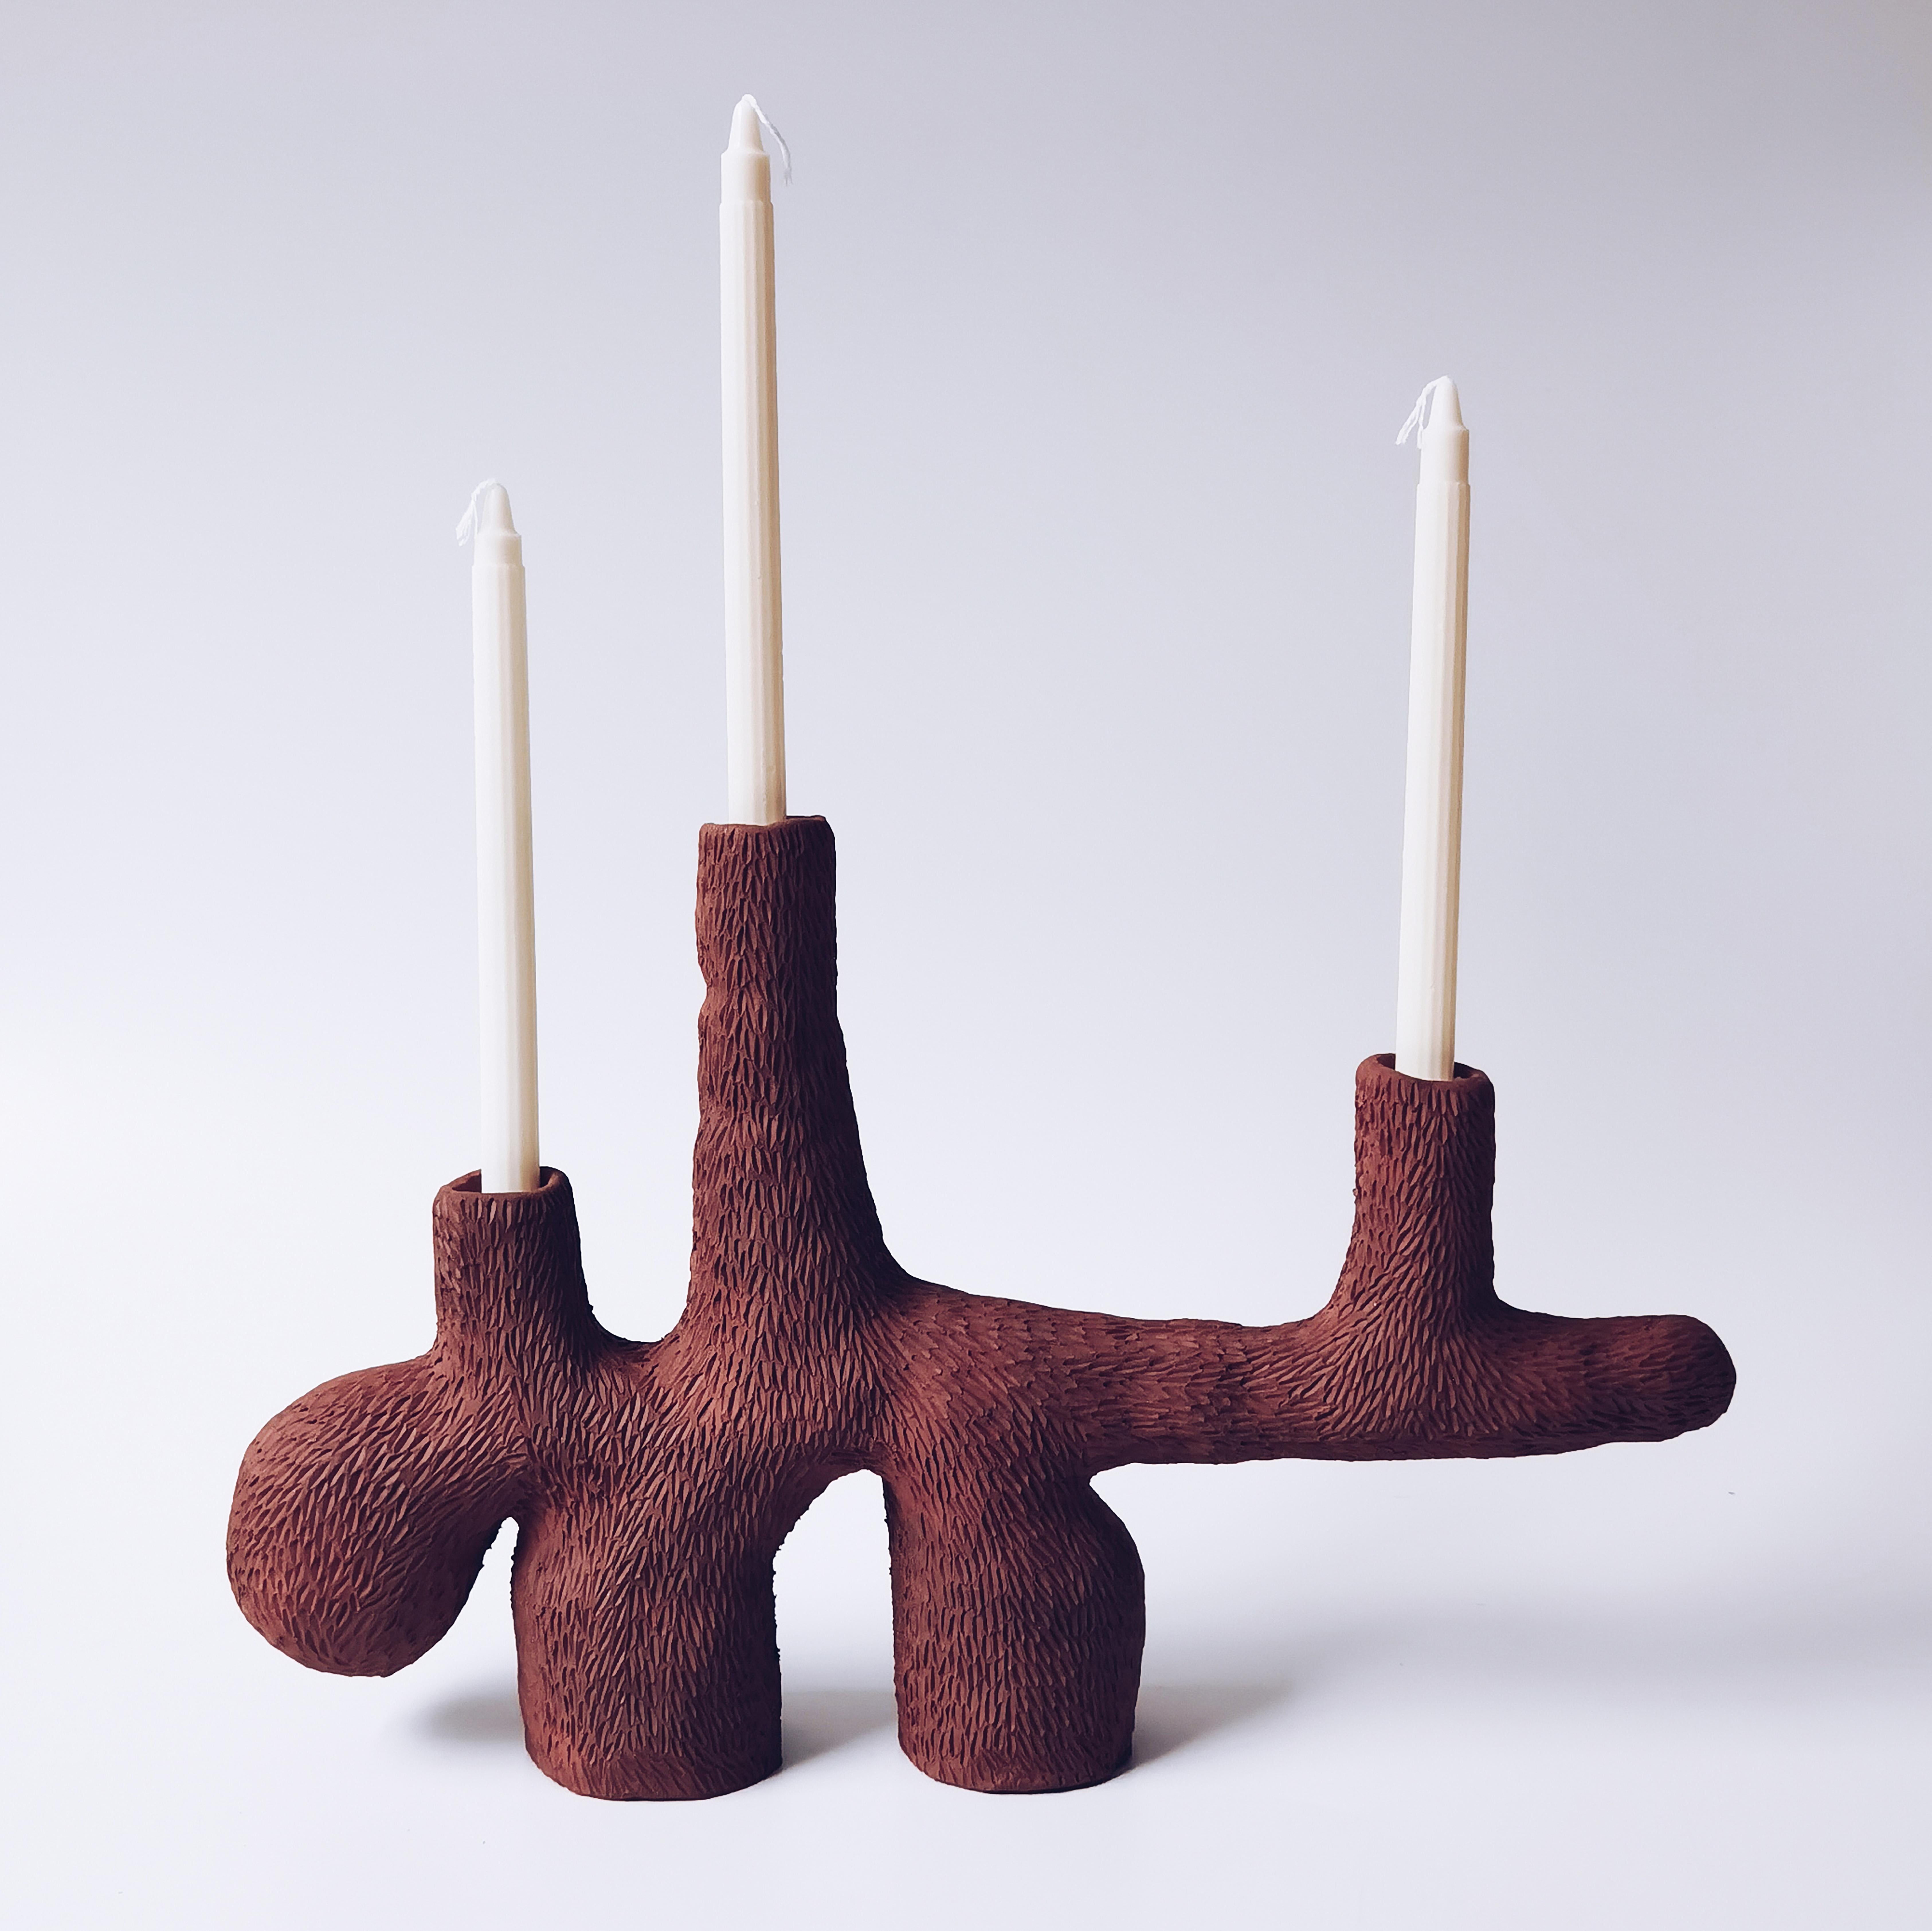 Forest terracotta candelabra by Jan Ernst
Dimensions: D48 x W 10 xH32 cm
Materials: Terracotta.
Also available: black clay / terracotta / white stoneware. 

Jan Ernst’s work takes on an experimental approach, as he prefers making bespoke pieces